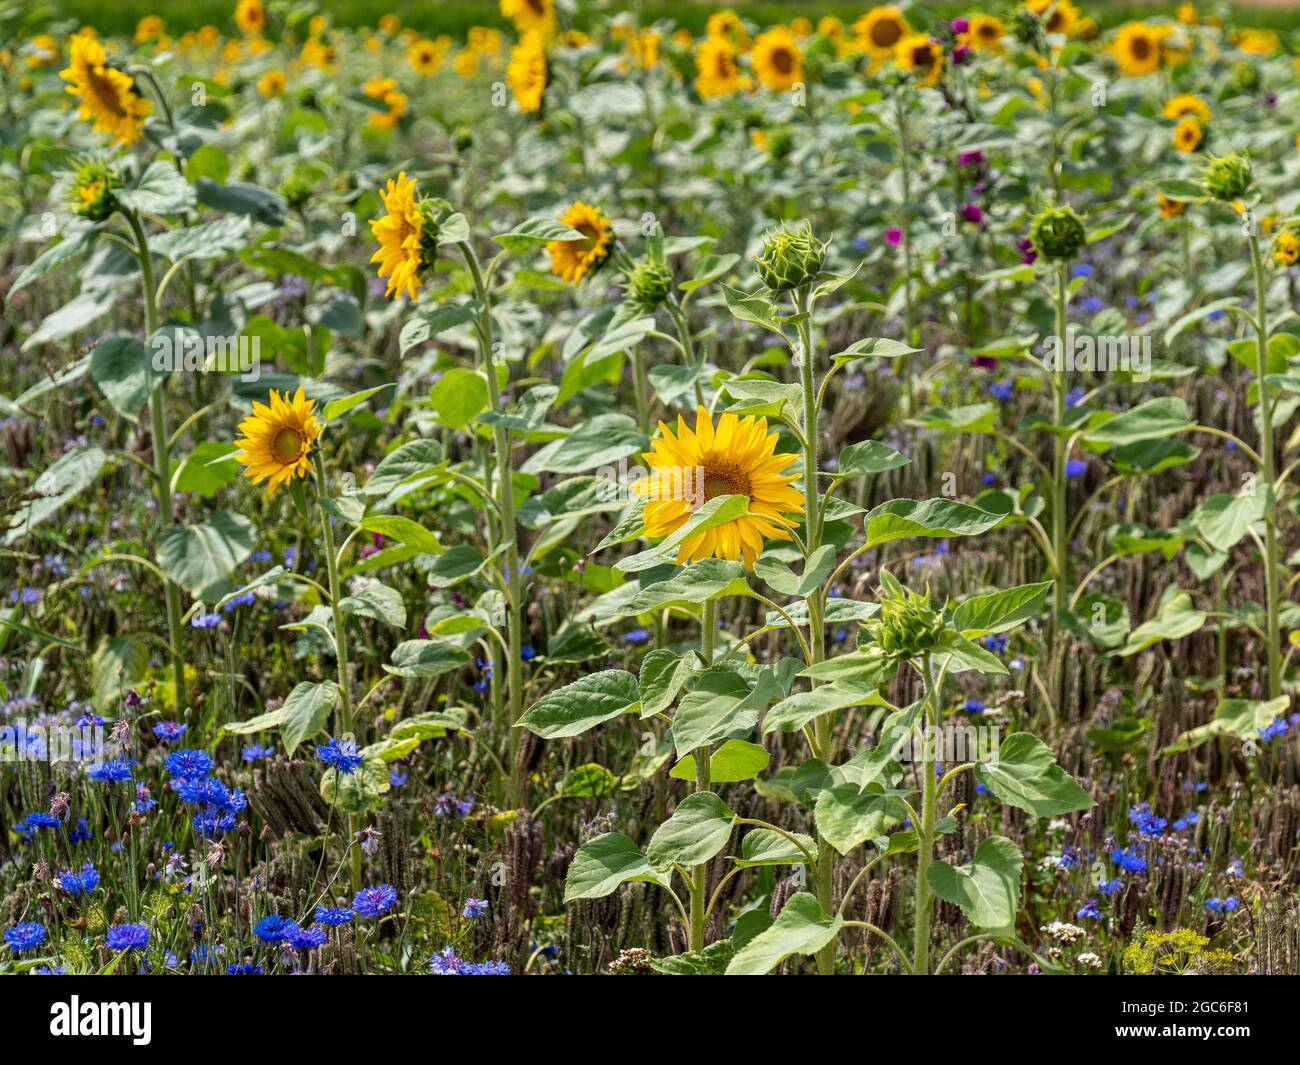 Field with sunflowers and blue cornflowers with selective focus on the foreground Stock Photo